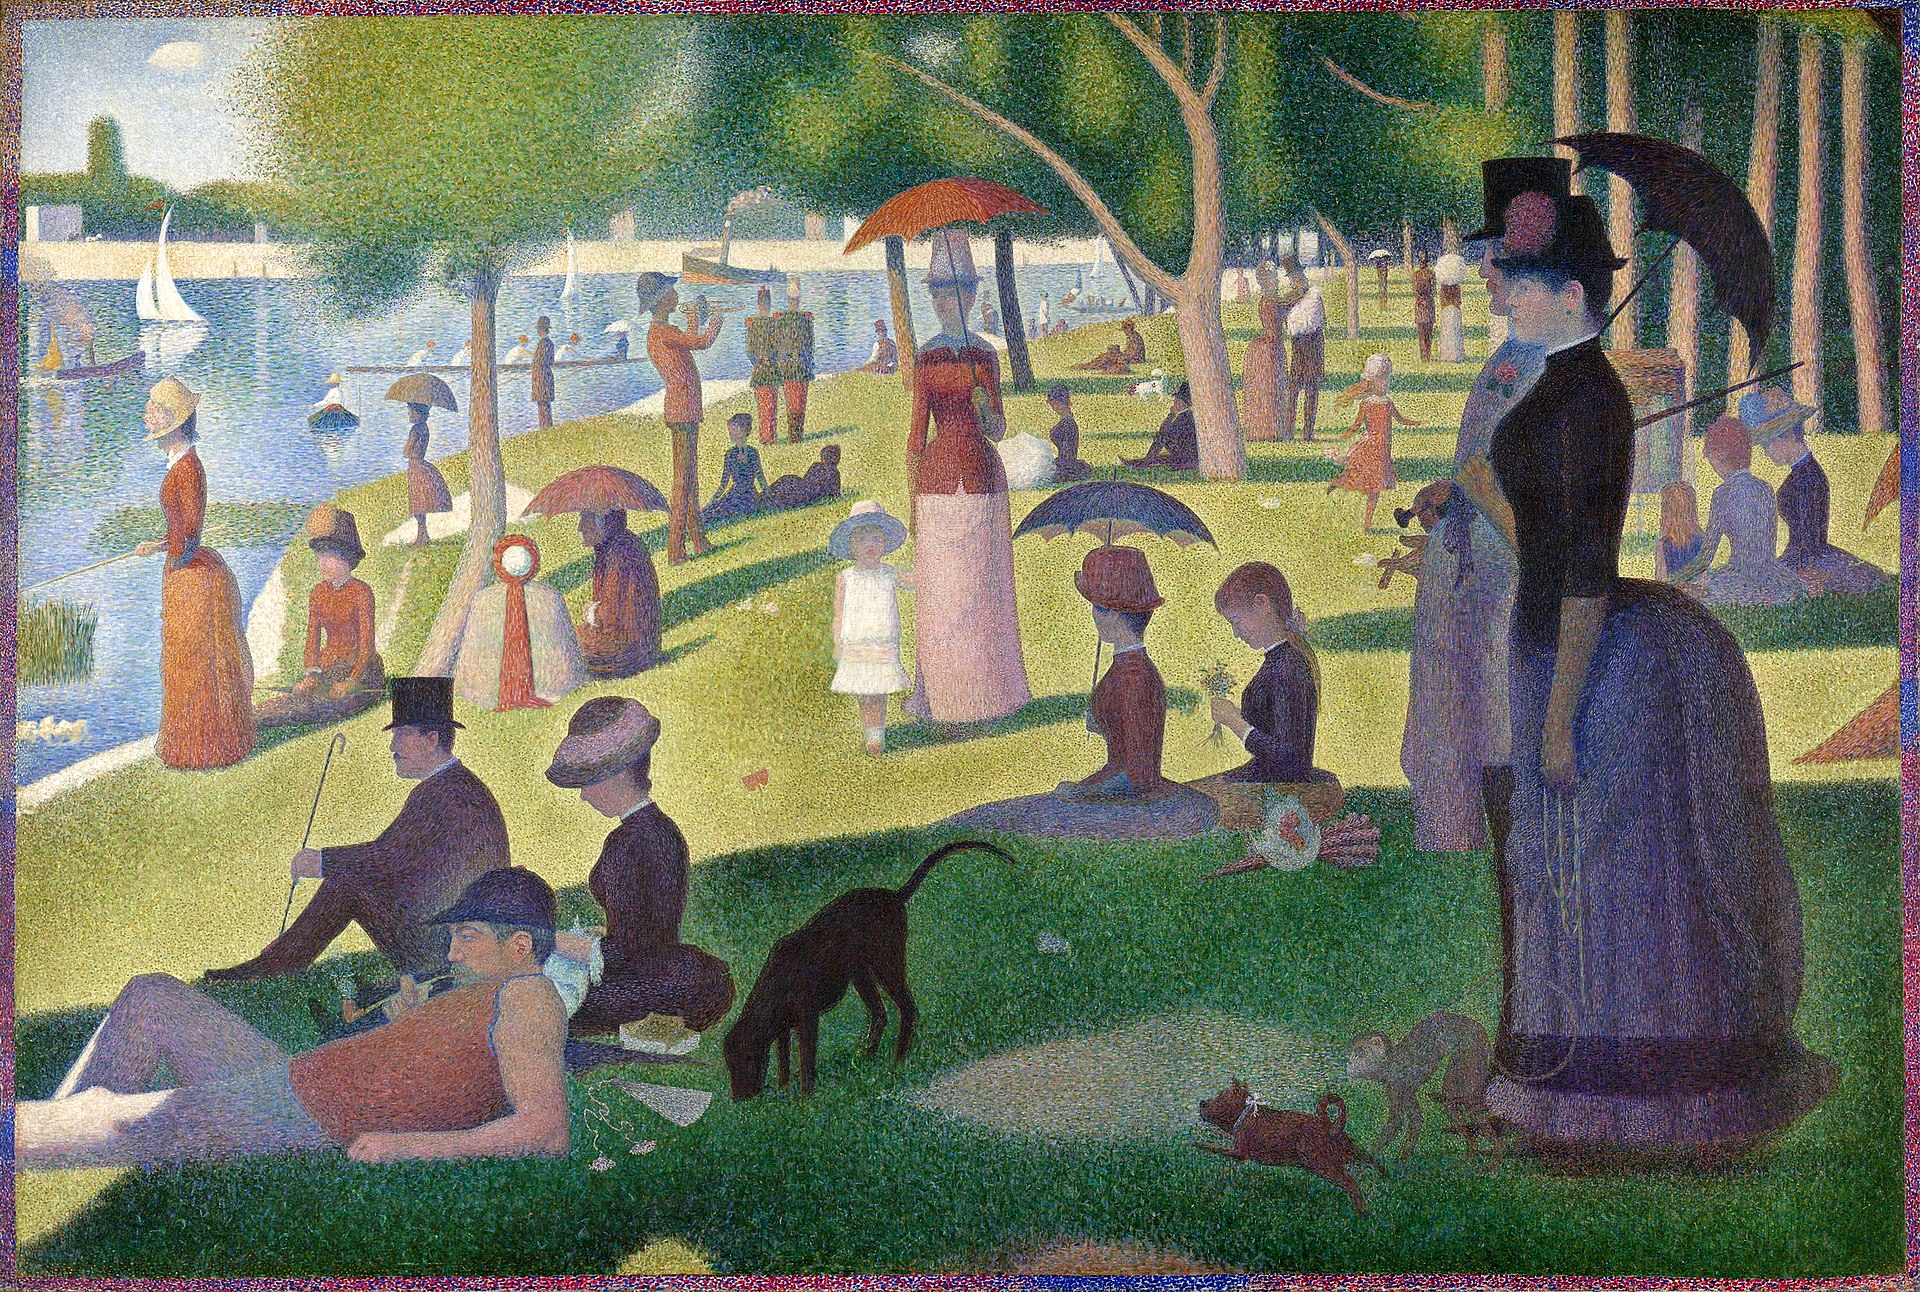 A painting in pointillism style. In the painting, people in 19th century clothing relax on the banks of a river. There are trees along the bank and sailboats in the water.